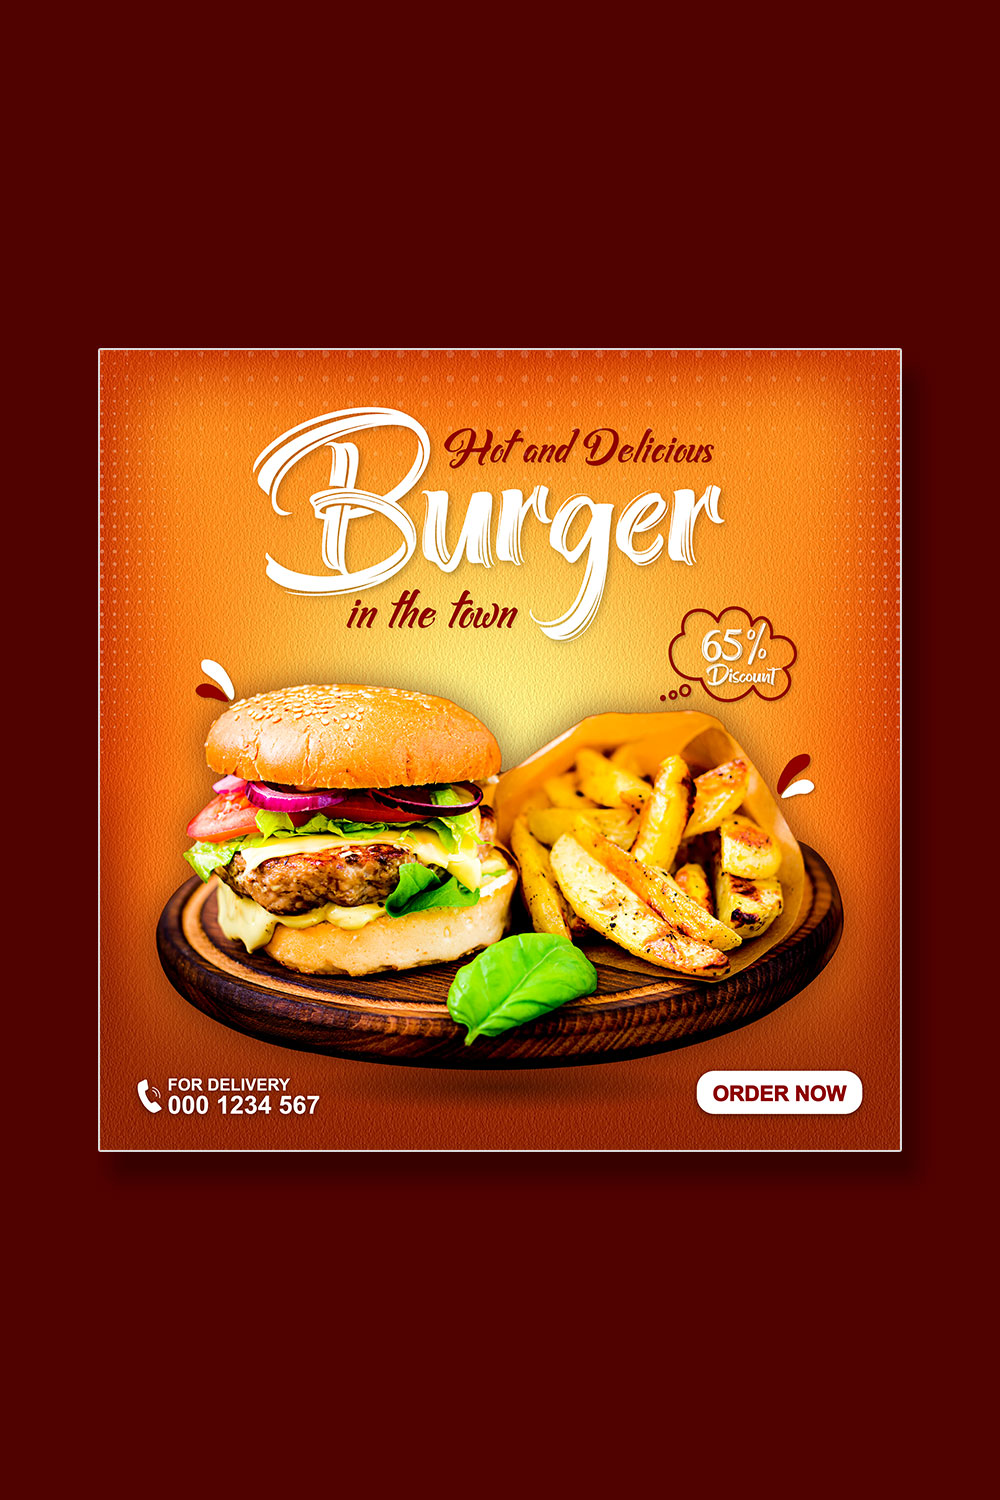 Food menu and delicious burger sale social media promotion template pinterest preview image.